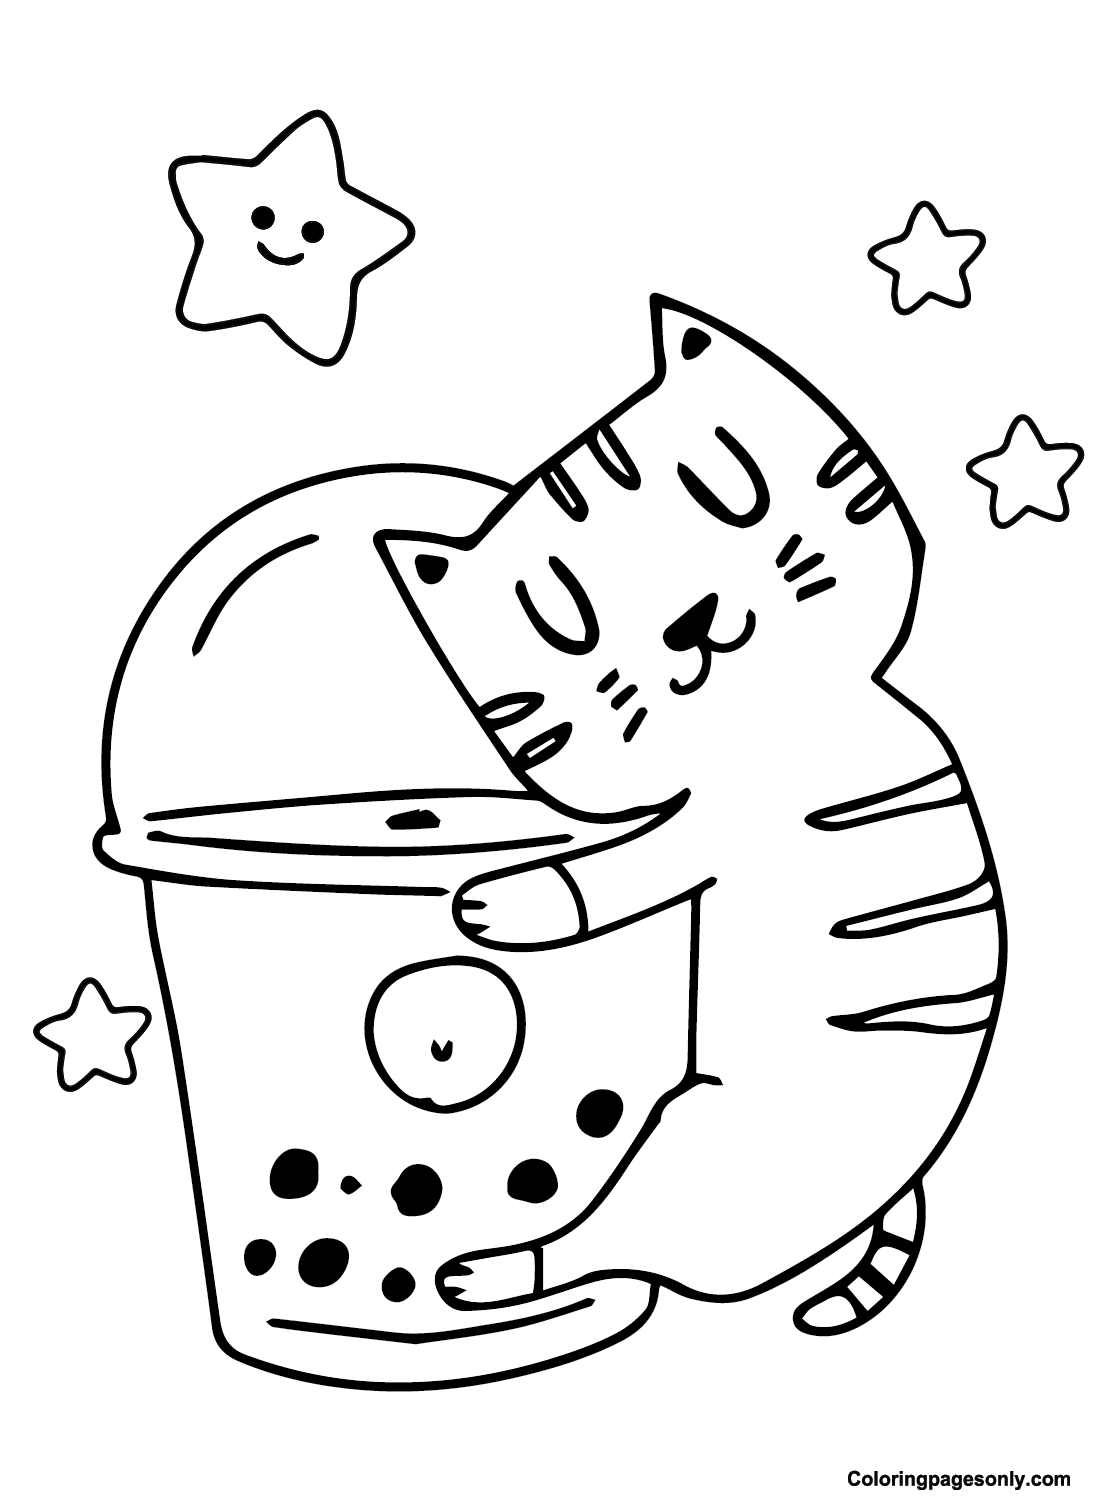 Cat Holding Boba Tea Coloring Pages